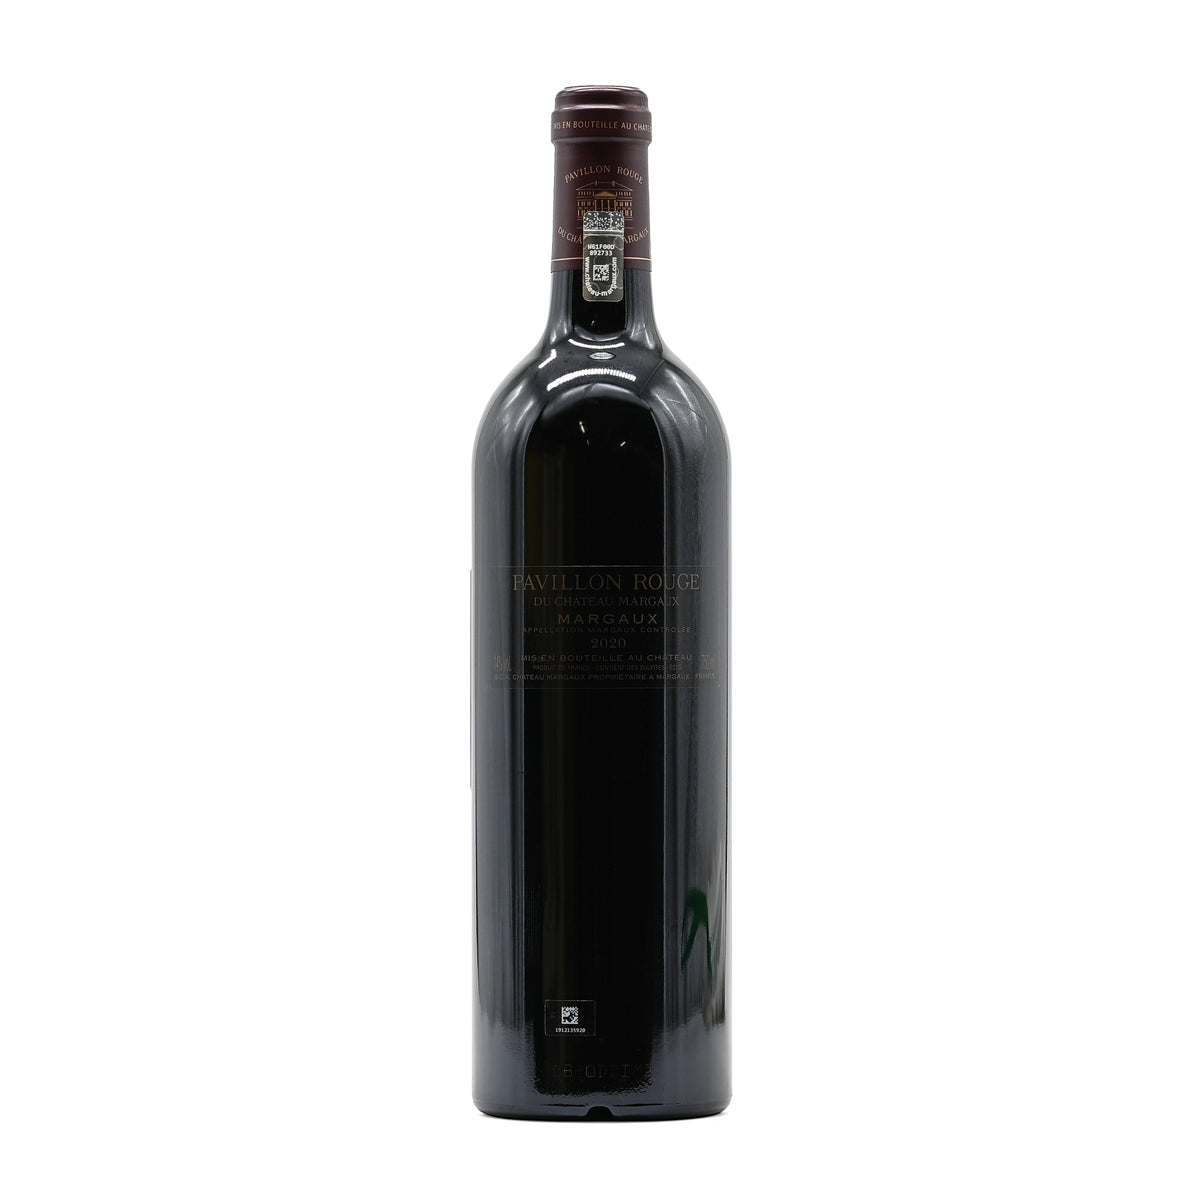 Pavillon Rouge du Château Margaux 2020, 750ml French red wine, made from a blend of Cabernet Sauvignon, Merlot, Cabernet Franc, and Petit Verdot ; from Margaux, Bordeaux, France – GDV Fine Wines, Hong Kong